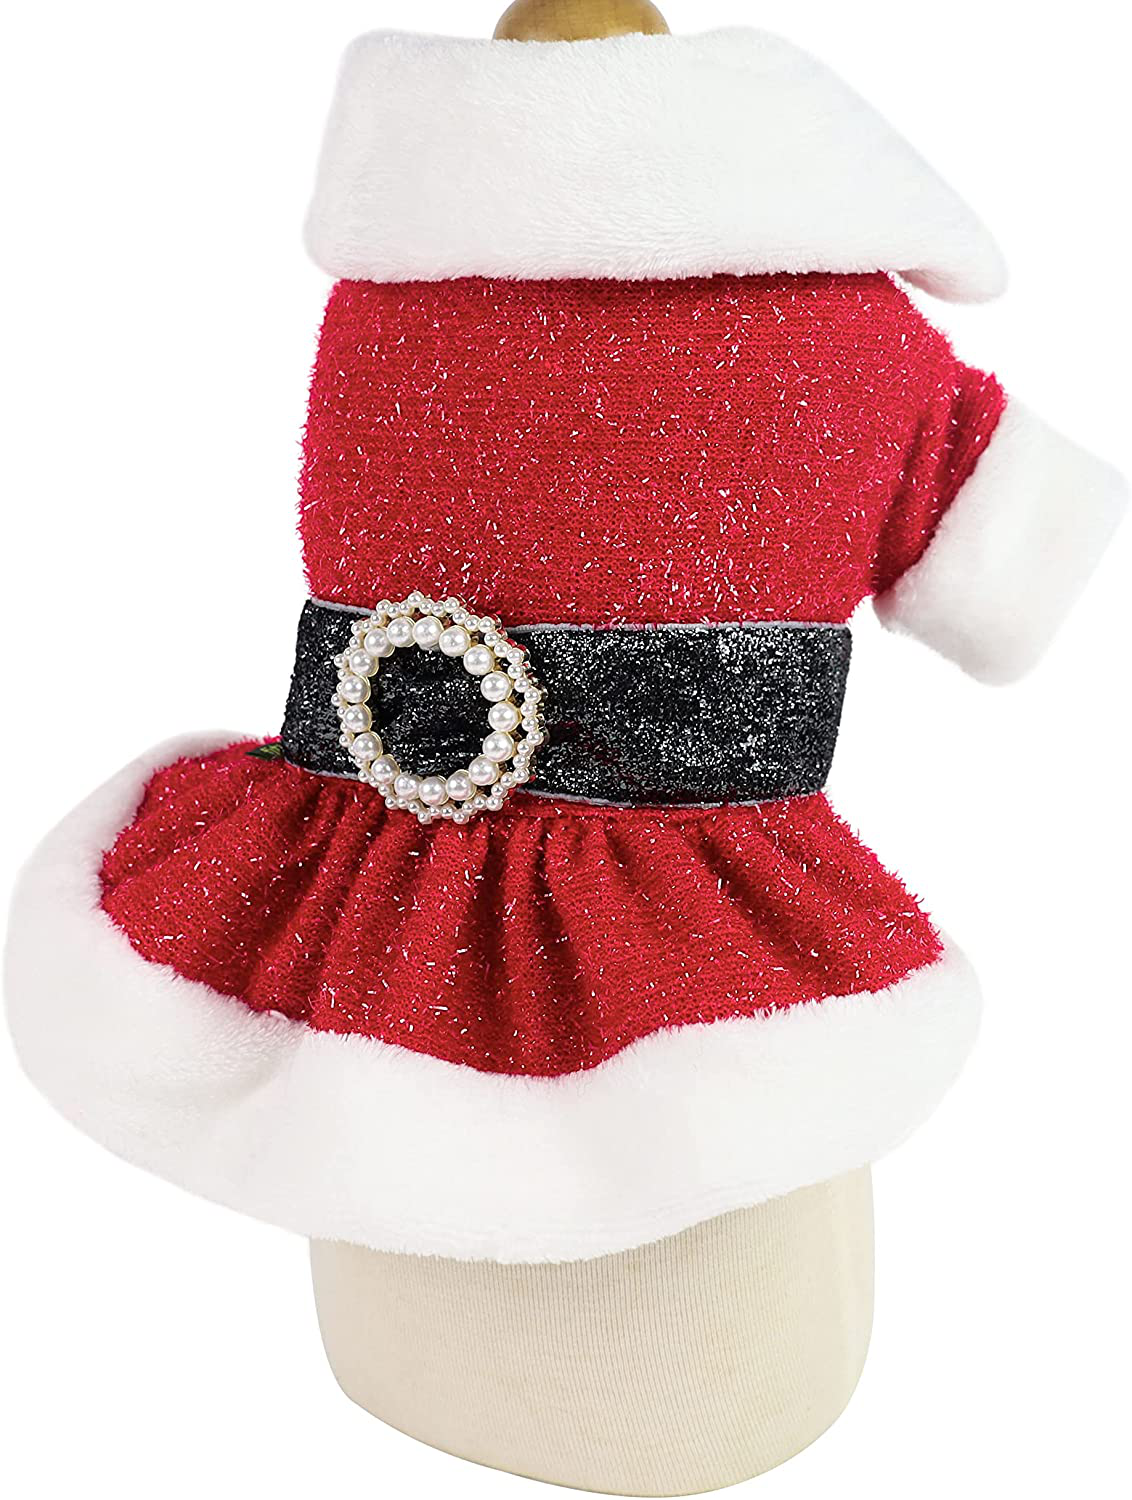 Fitwarm Bling Bling Santa Claus Dog Christmas Outfit Thermal Holiday Girl Puppy Costume Velvet Dogs Dress Pet Winter Clothes Cat Coat Doggie Jackets Apparel